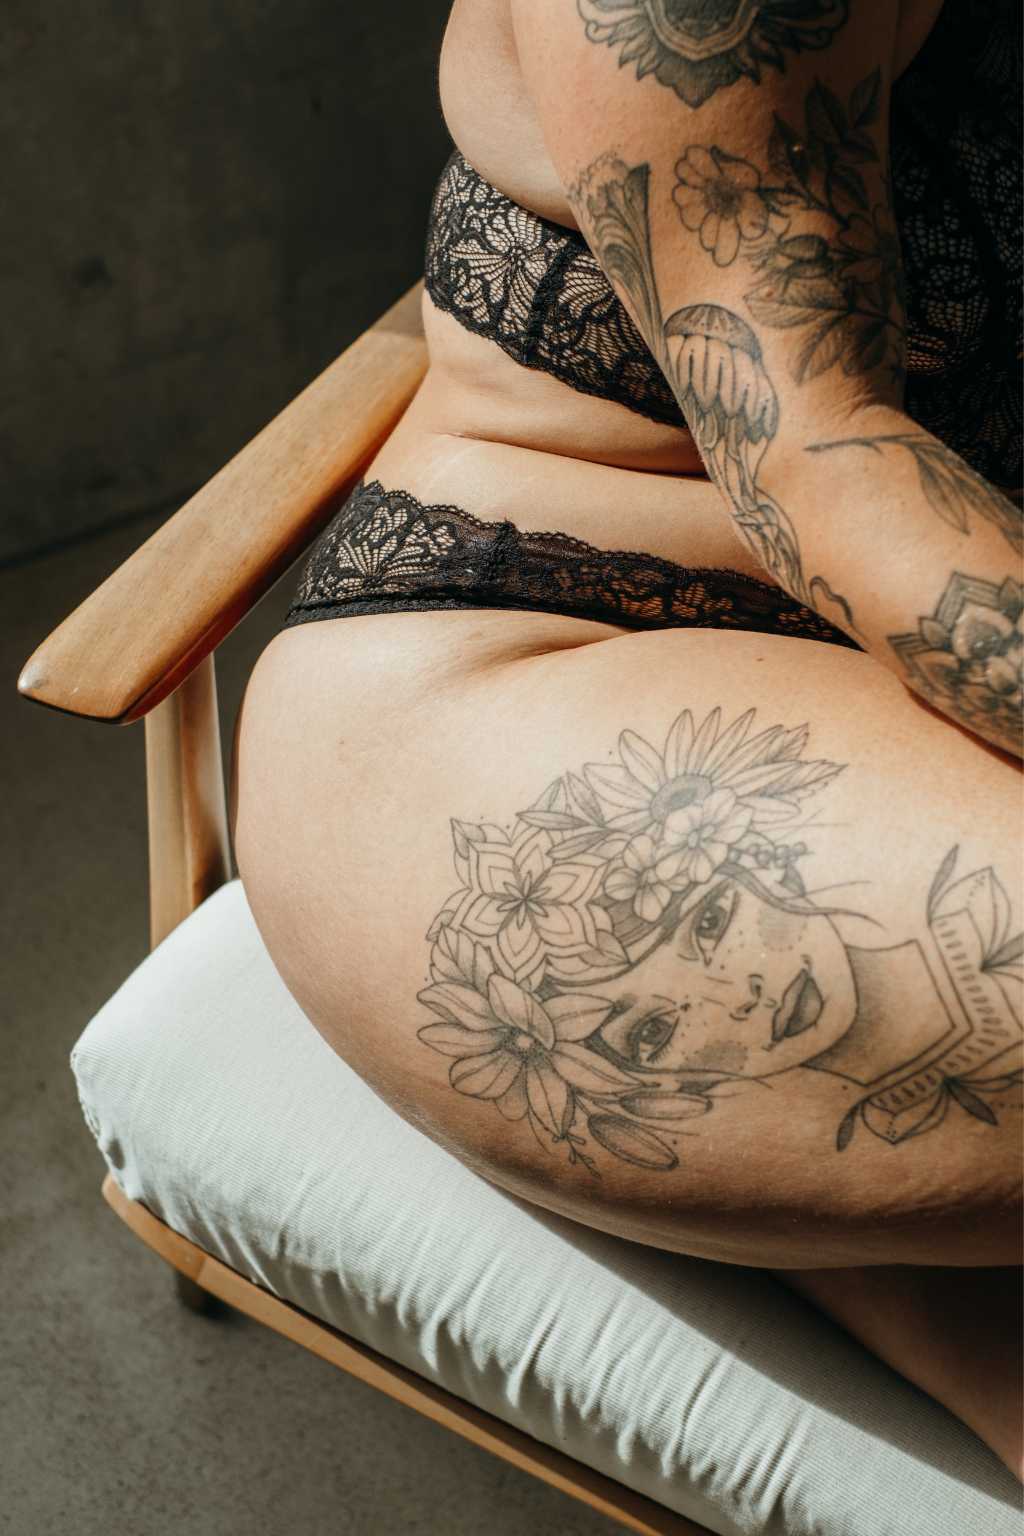 Detail of tattoo and lace panties Lana from thoughts of september